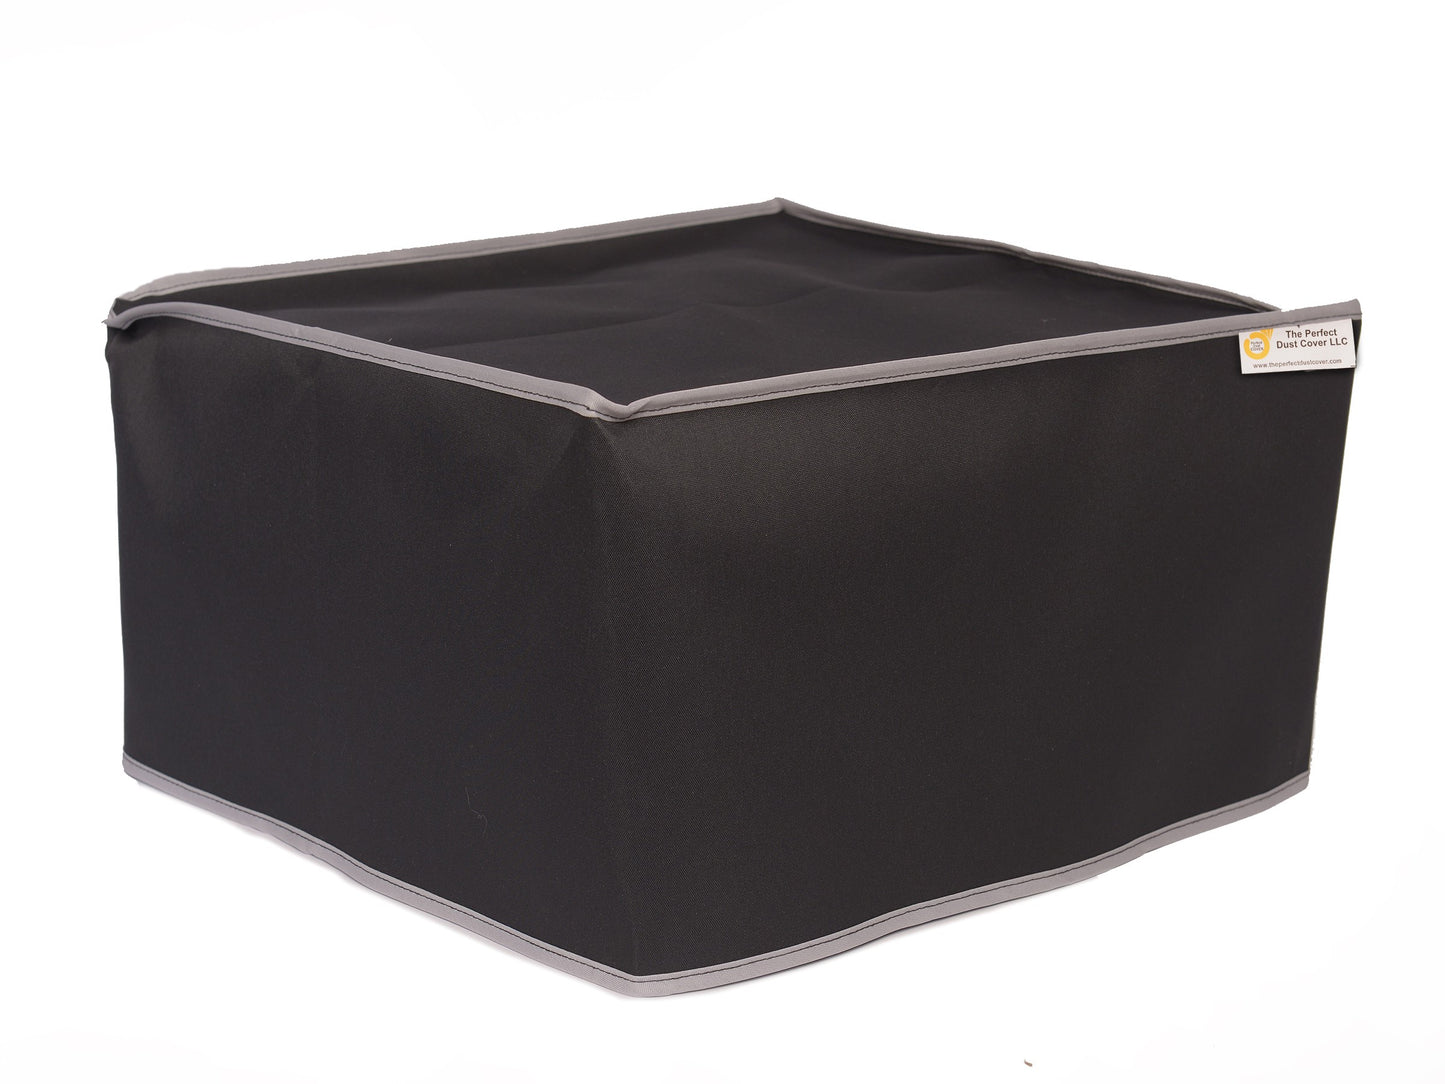 The Perfect Dust Cover, Black Nylon Cover Compatible with Kyocera ECOSYS P3150dn Monochrome Laser Printer, Anti-Static, Double Stitched and Waterproof Dust Cover Dimensions 15''W x 16.1''D x 12.6''H by The Perfect Dust Cover LLC